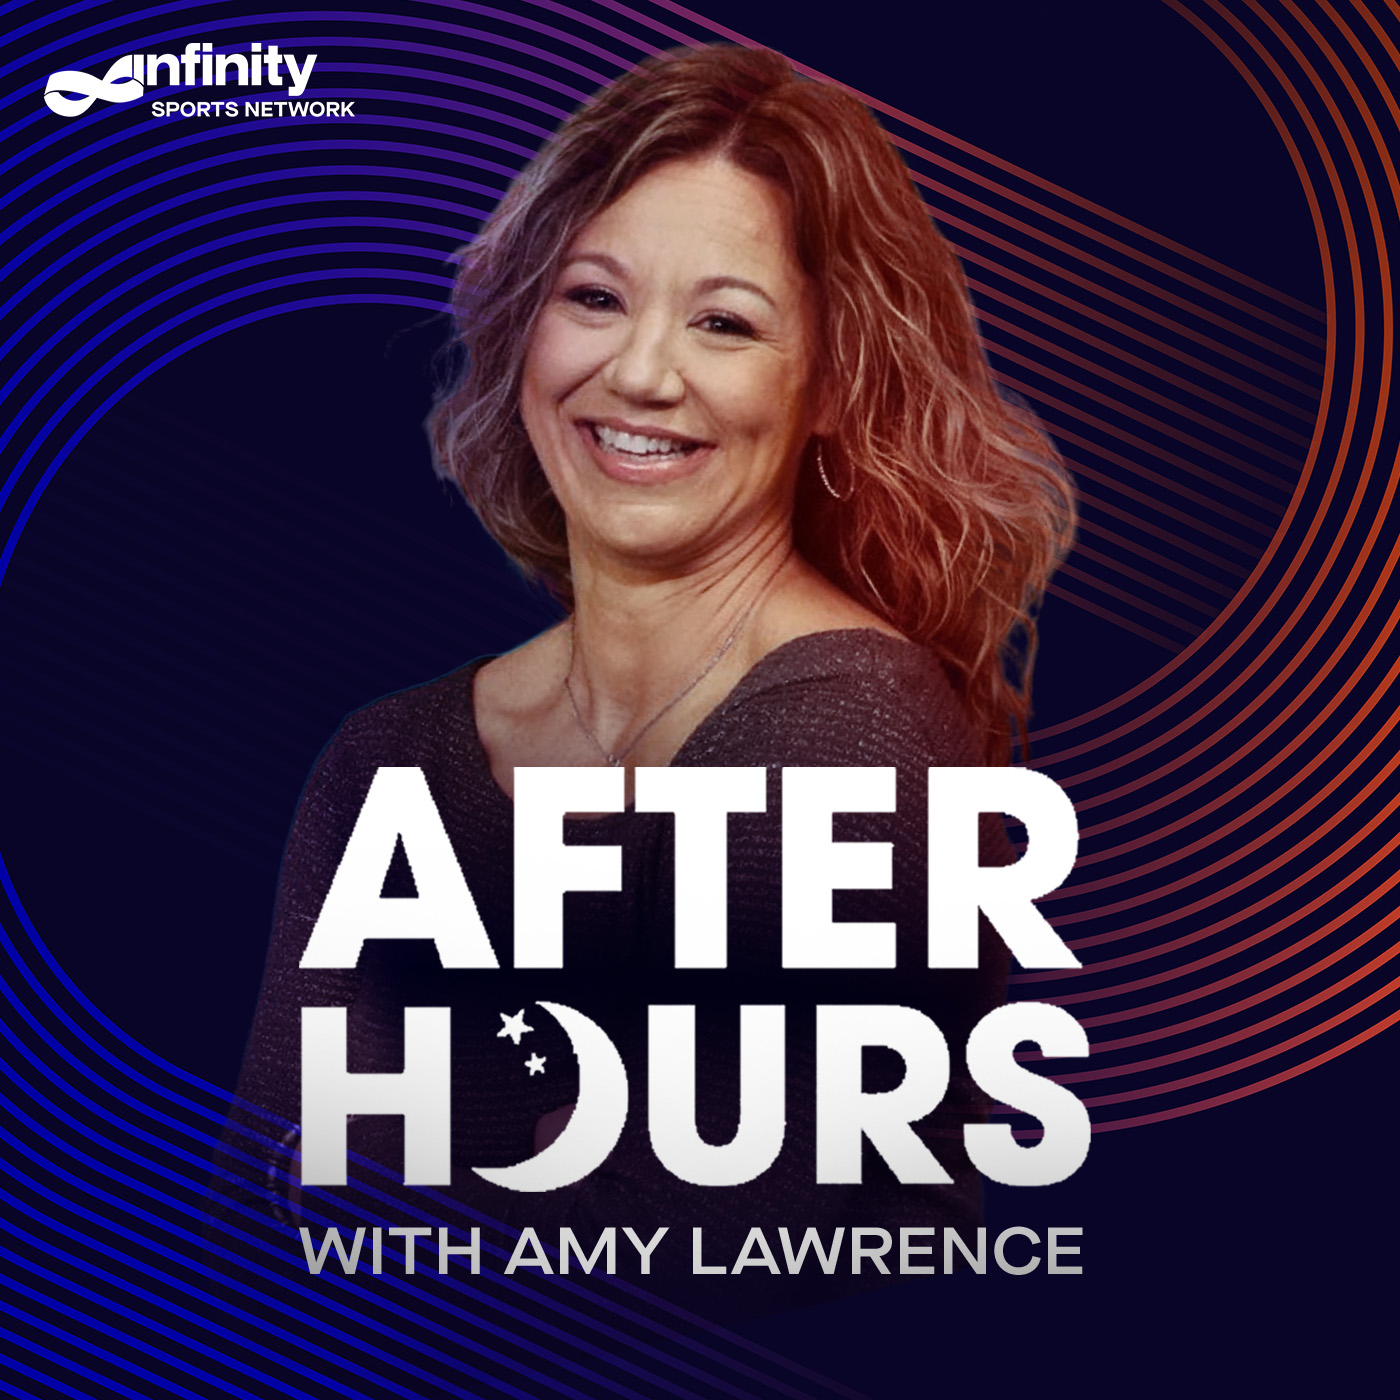 10-13-21 After Hours with Amy Lawrence PODCAST: Hour 2